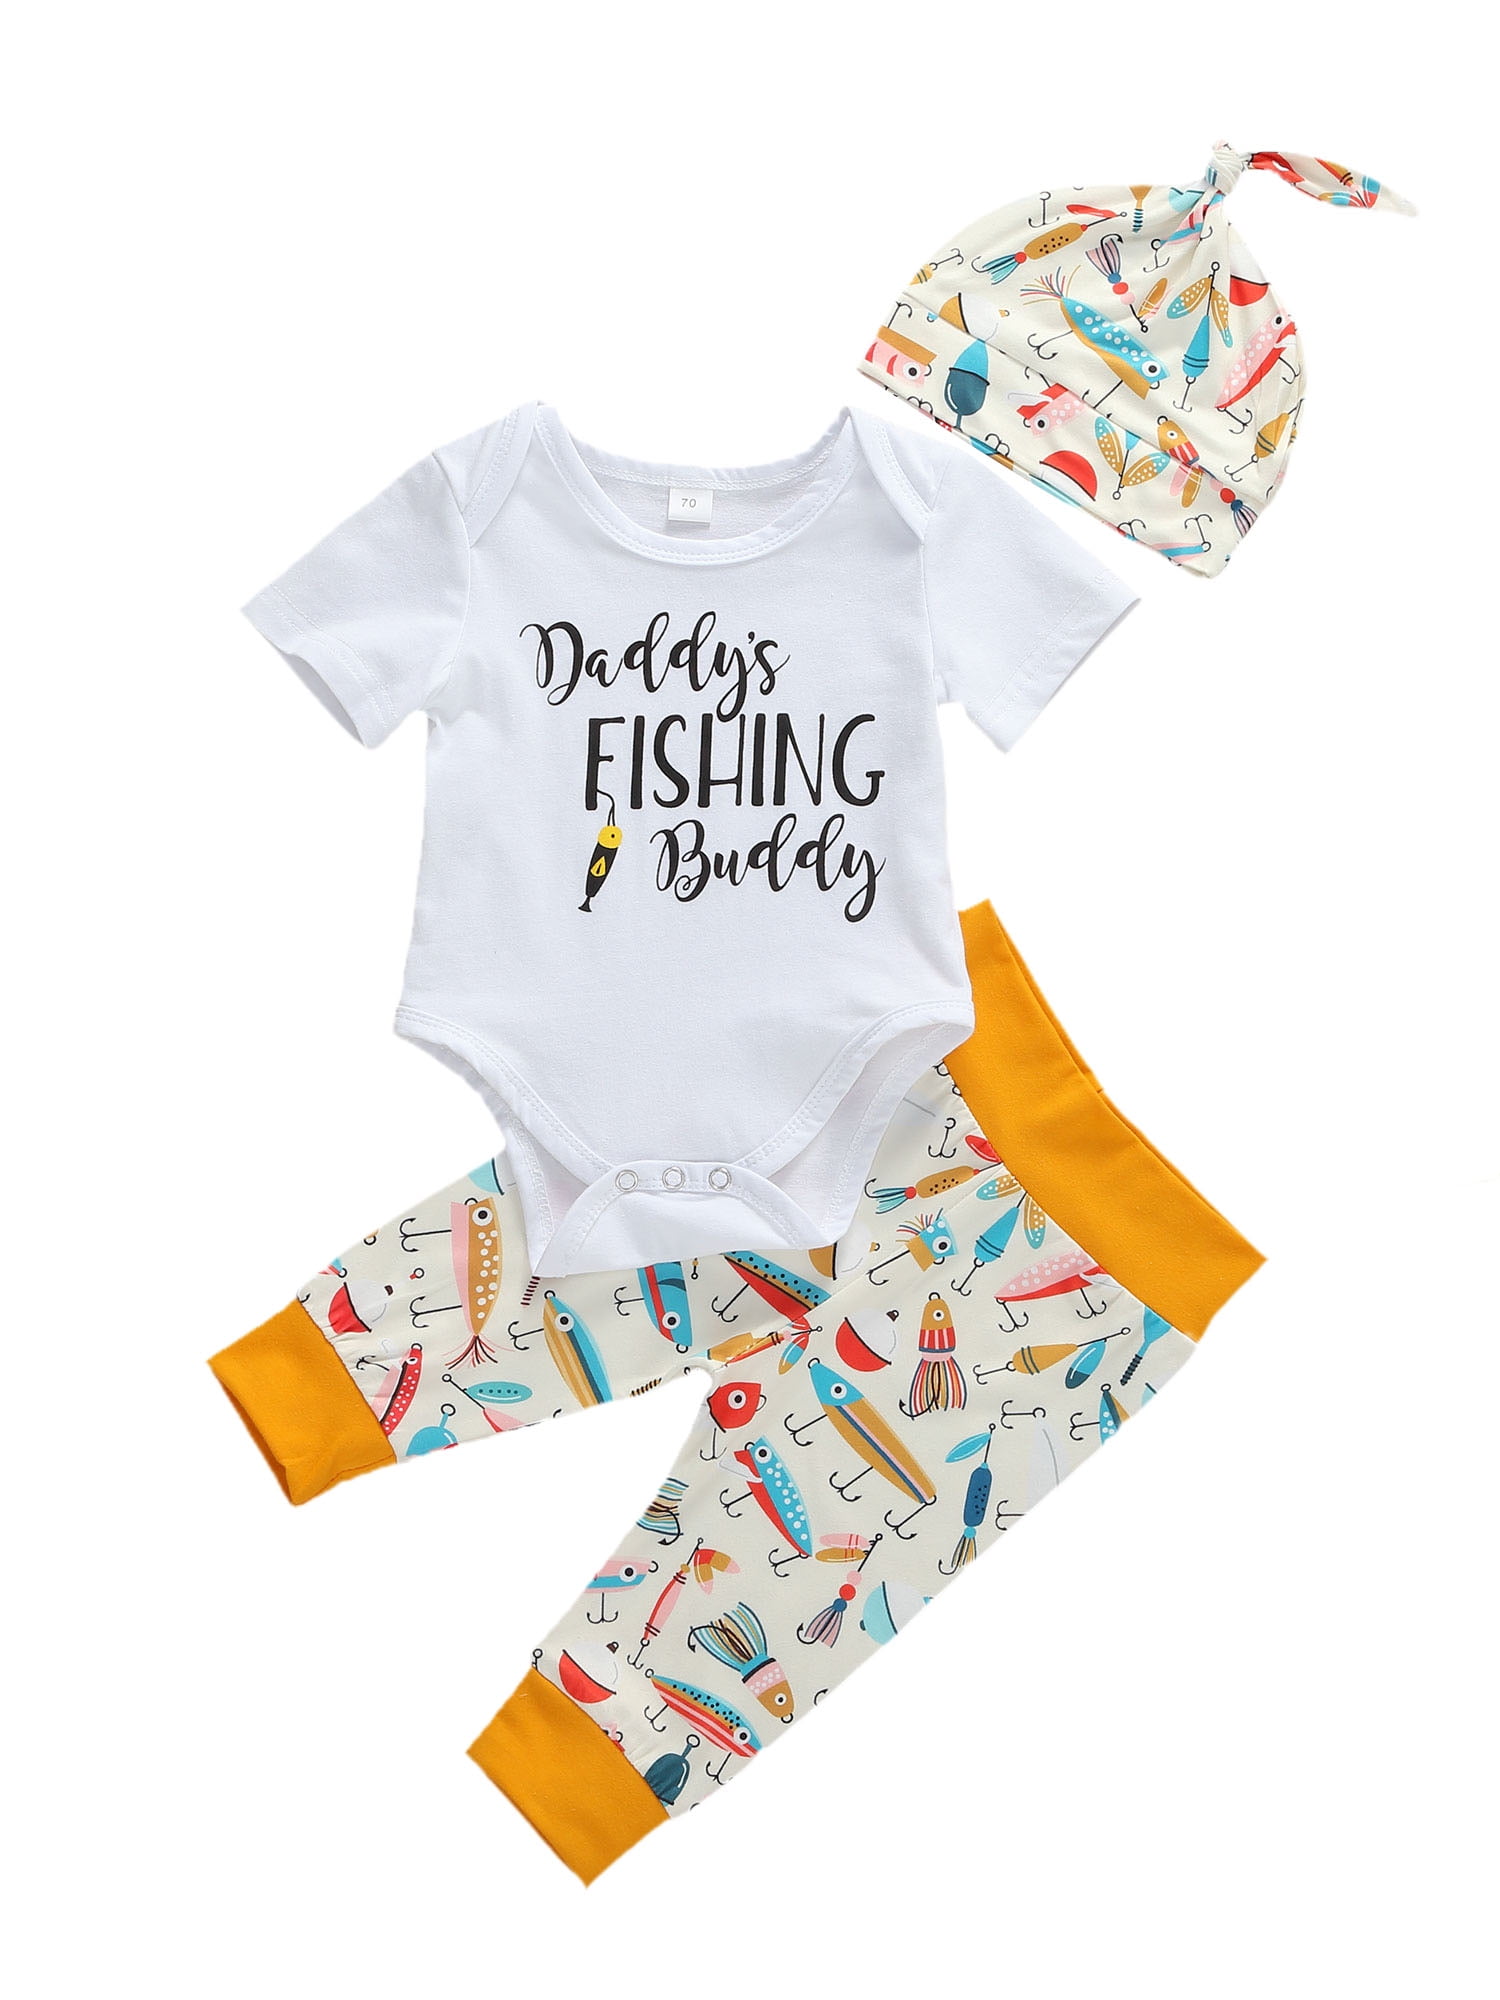 Boys Fishing Outfit, Summer Outfit for Boys, Toddlers Fishing